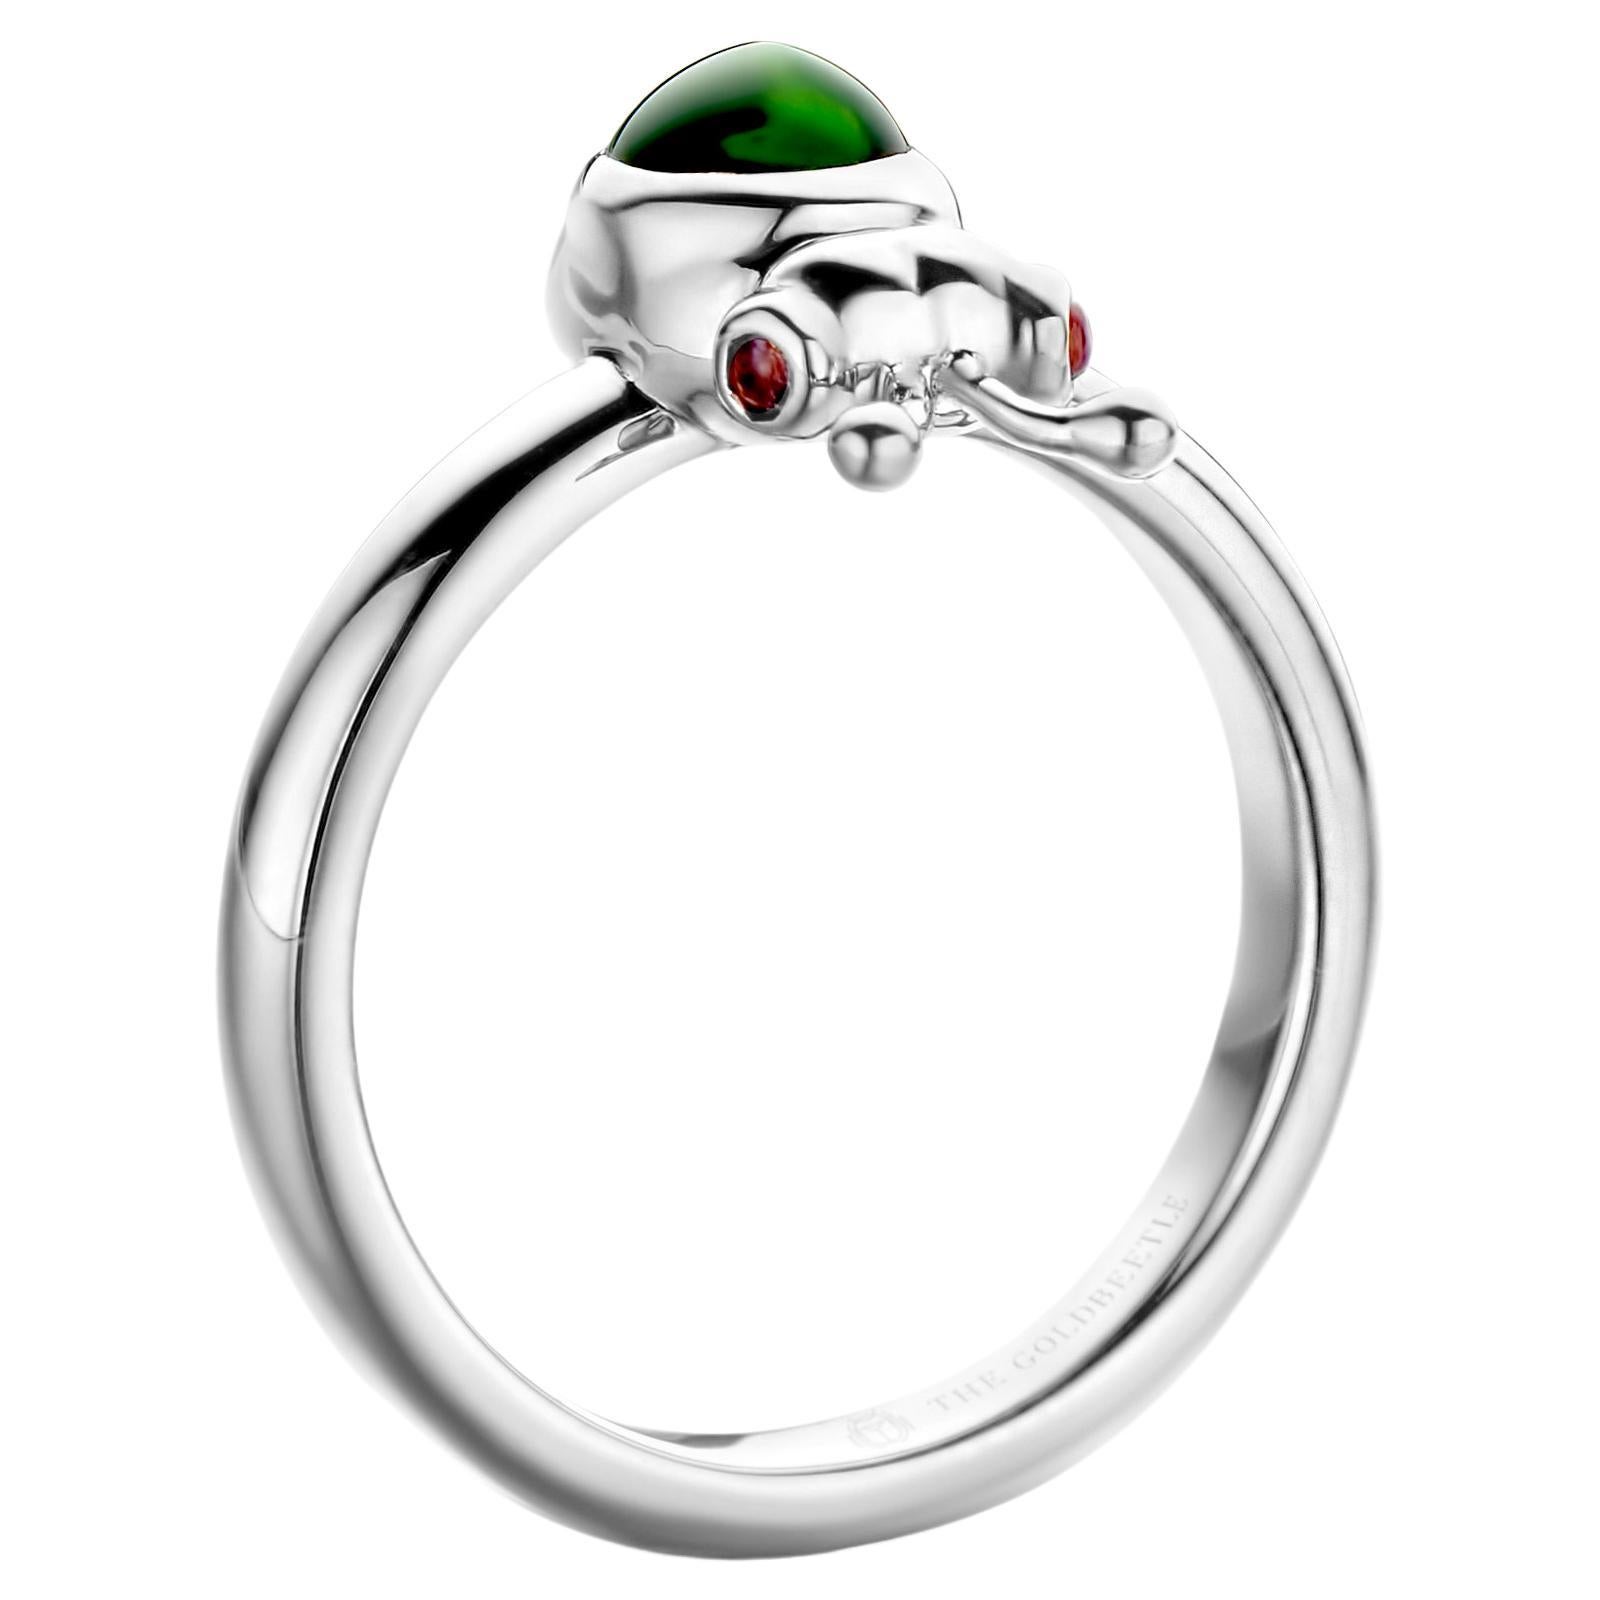 18K white gold Lilou ring set with one natural pear-shaped cabochon Green Tourmaline and two natural Pink Tourmalines in round cabochon cut
